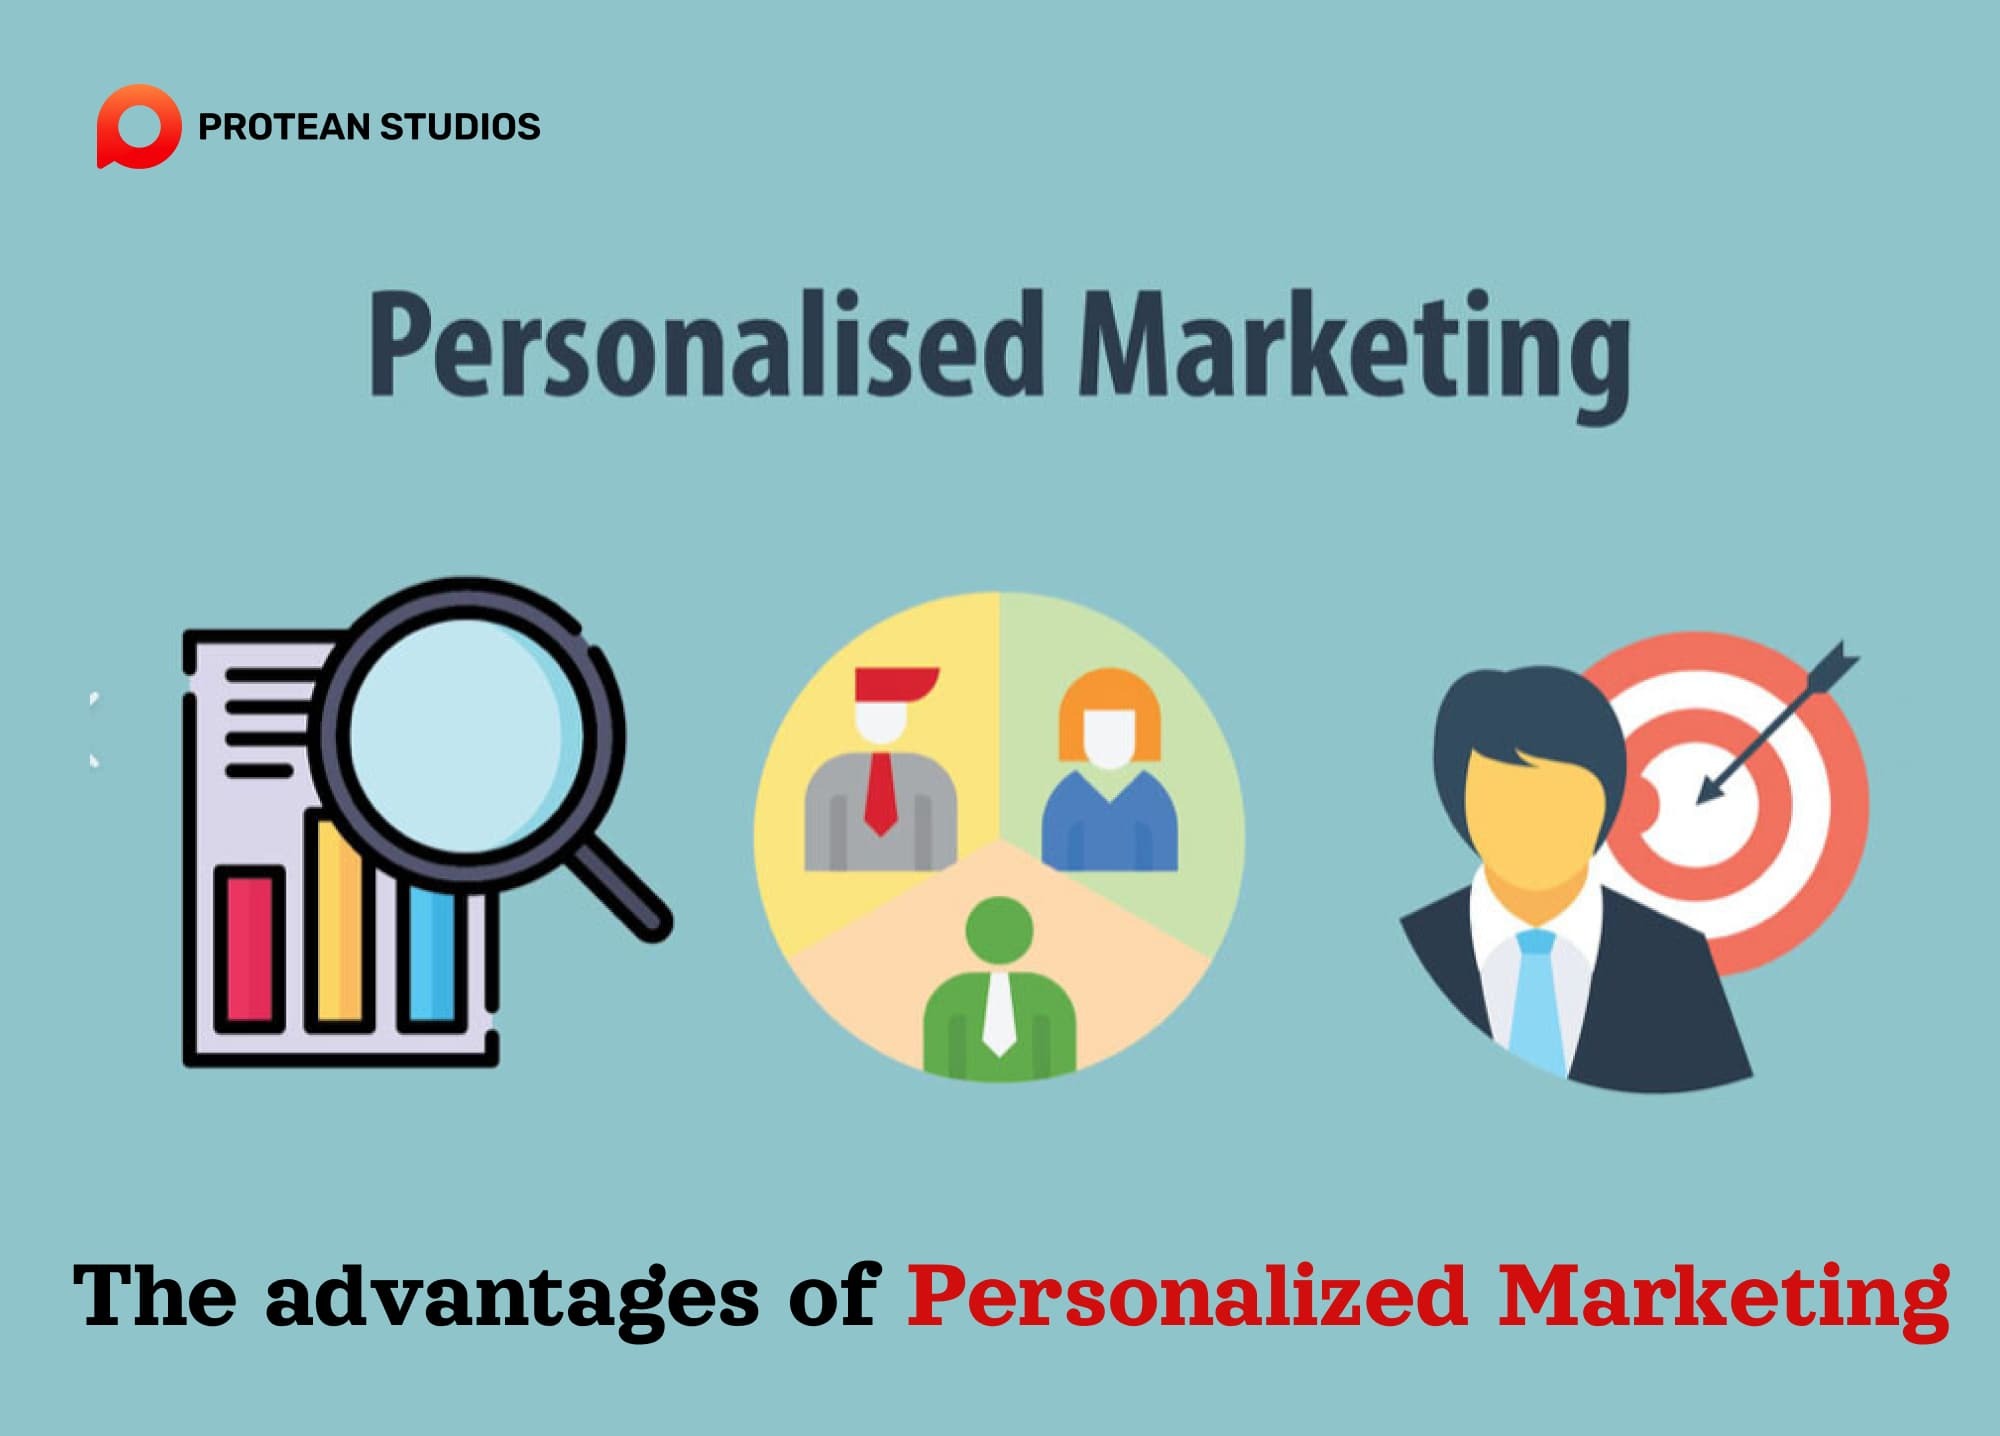 Some benefits of personalized marketing for businesses and customers